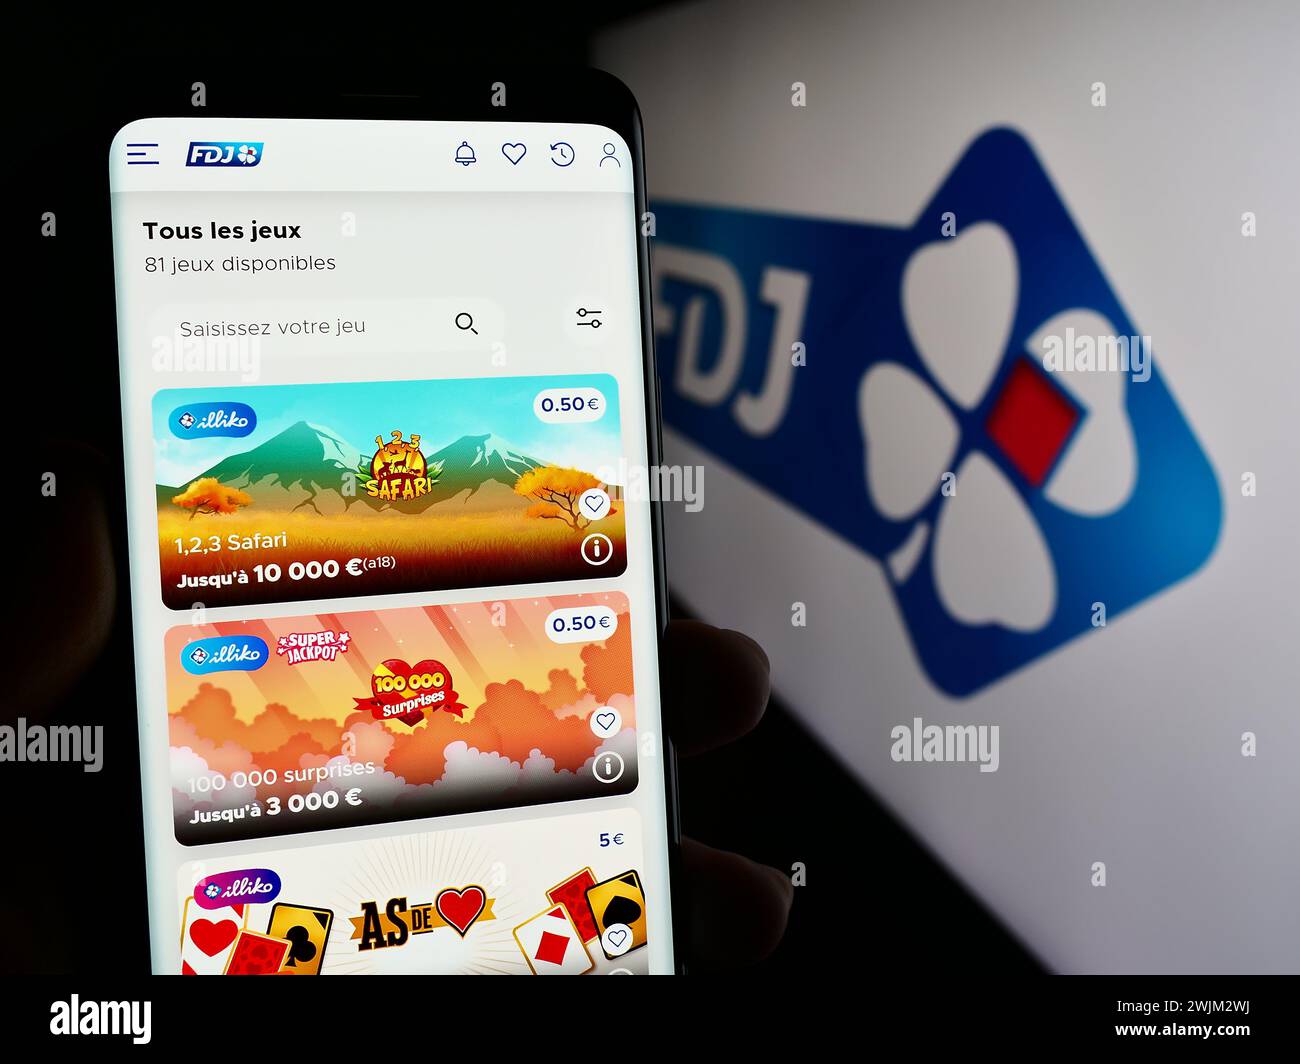 Person holding mobile phone with web page of French lottery company Francaise des Jeux (FDJ) in front of logo. Focus on center of phone display. Stock Photo